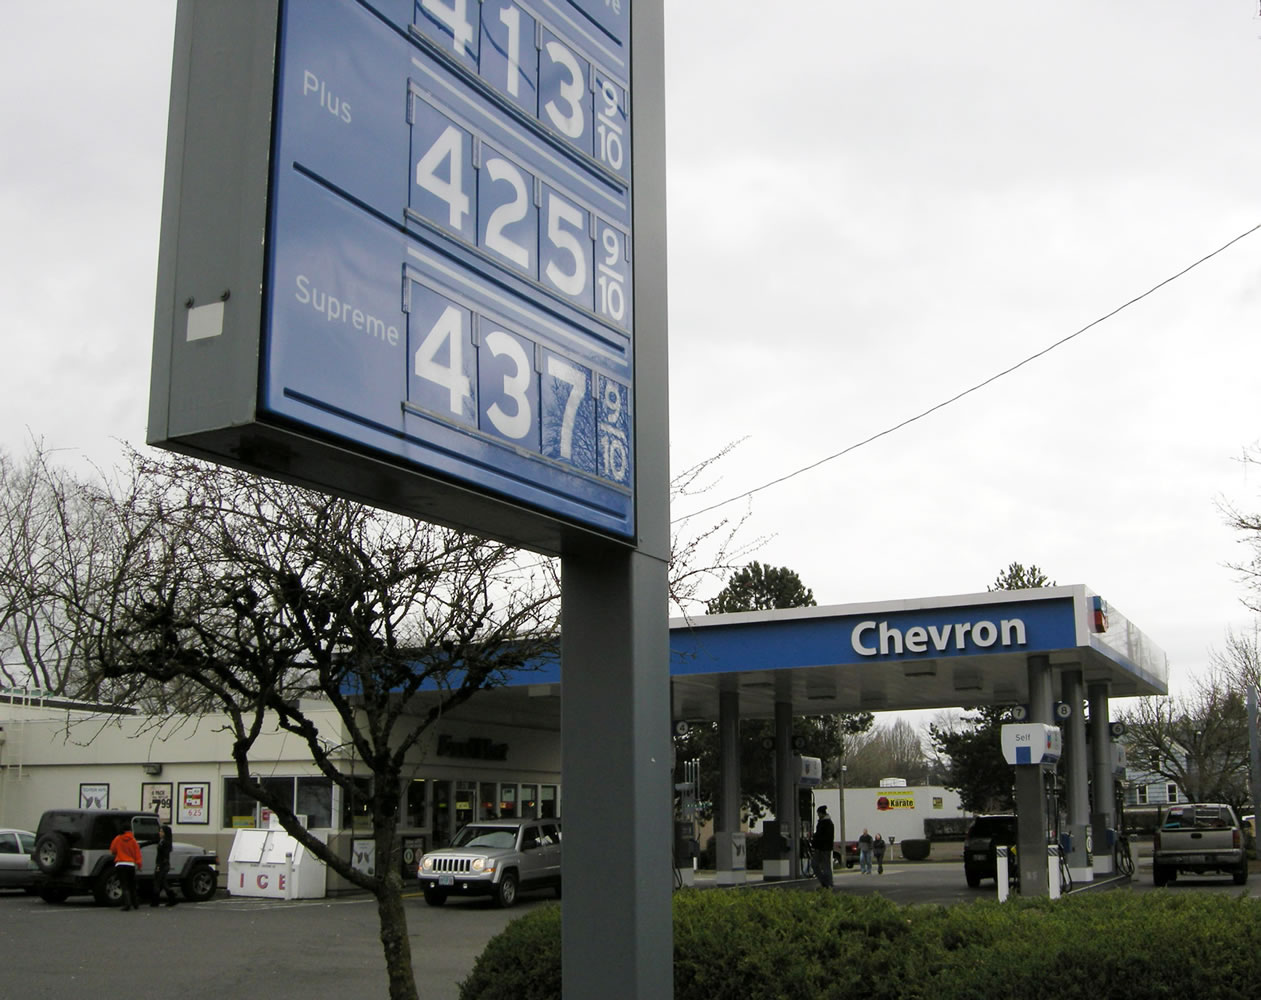 After remaining stubbornly high, the average price of gasoline in Vancouver dropped by 17 cents in the past week to $4.10, AAA Oregon/Idaho reported.